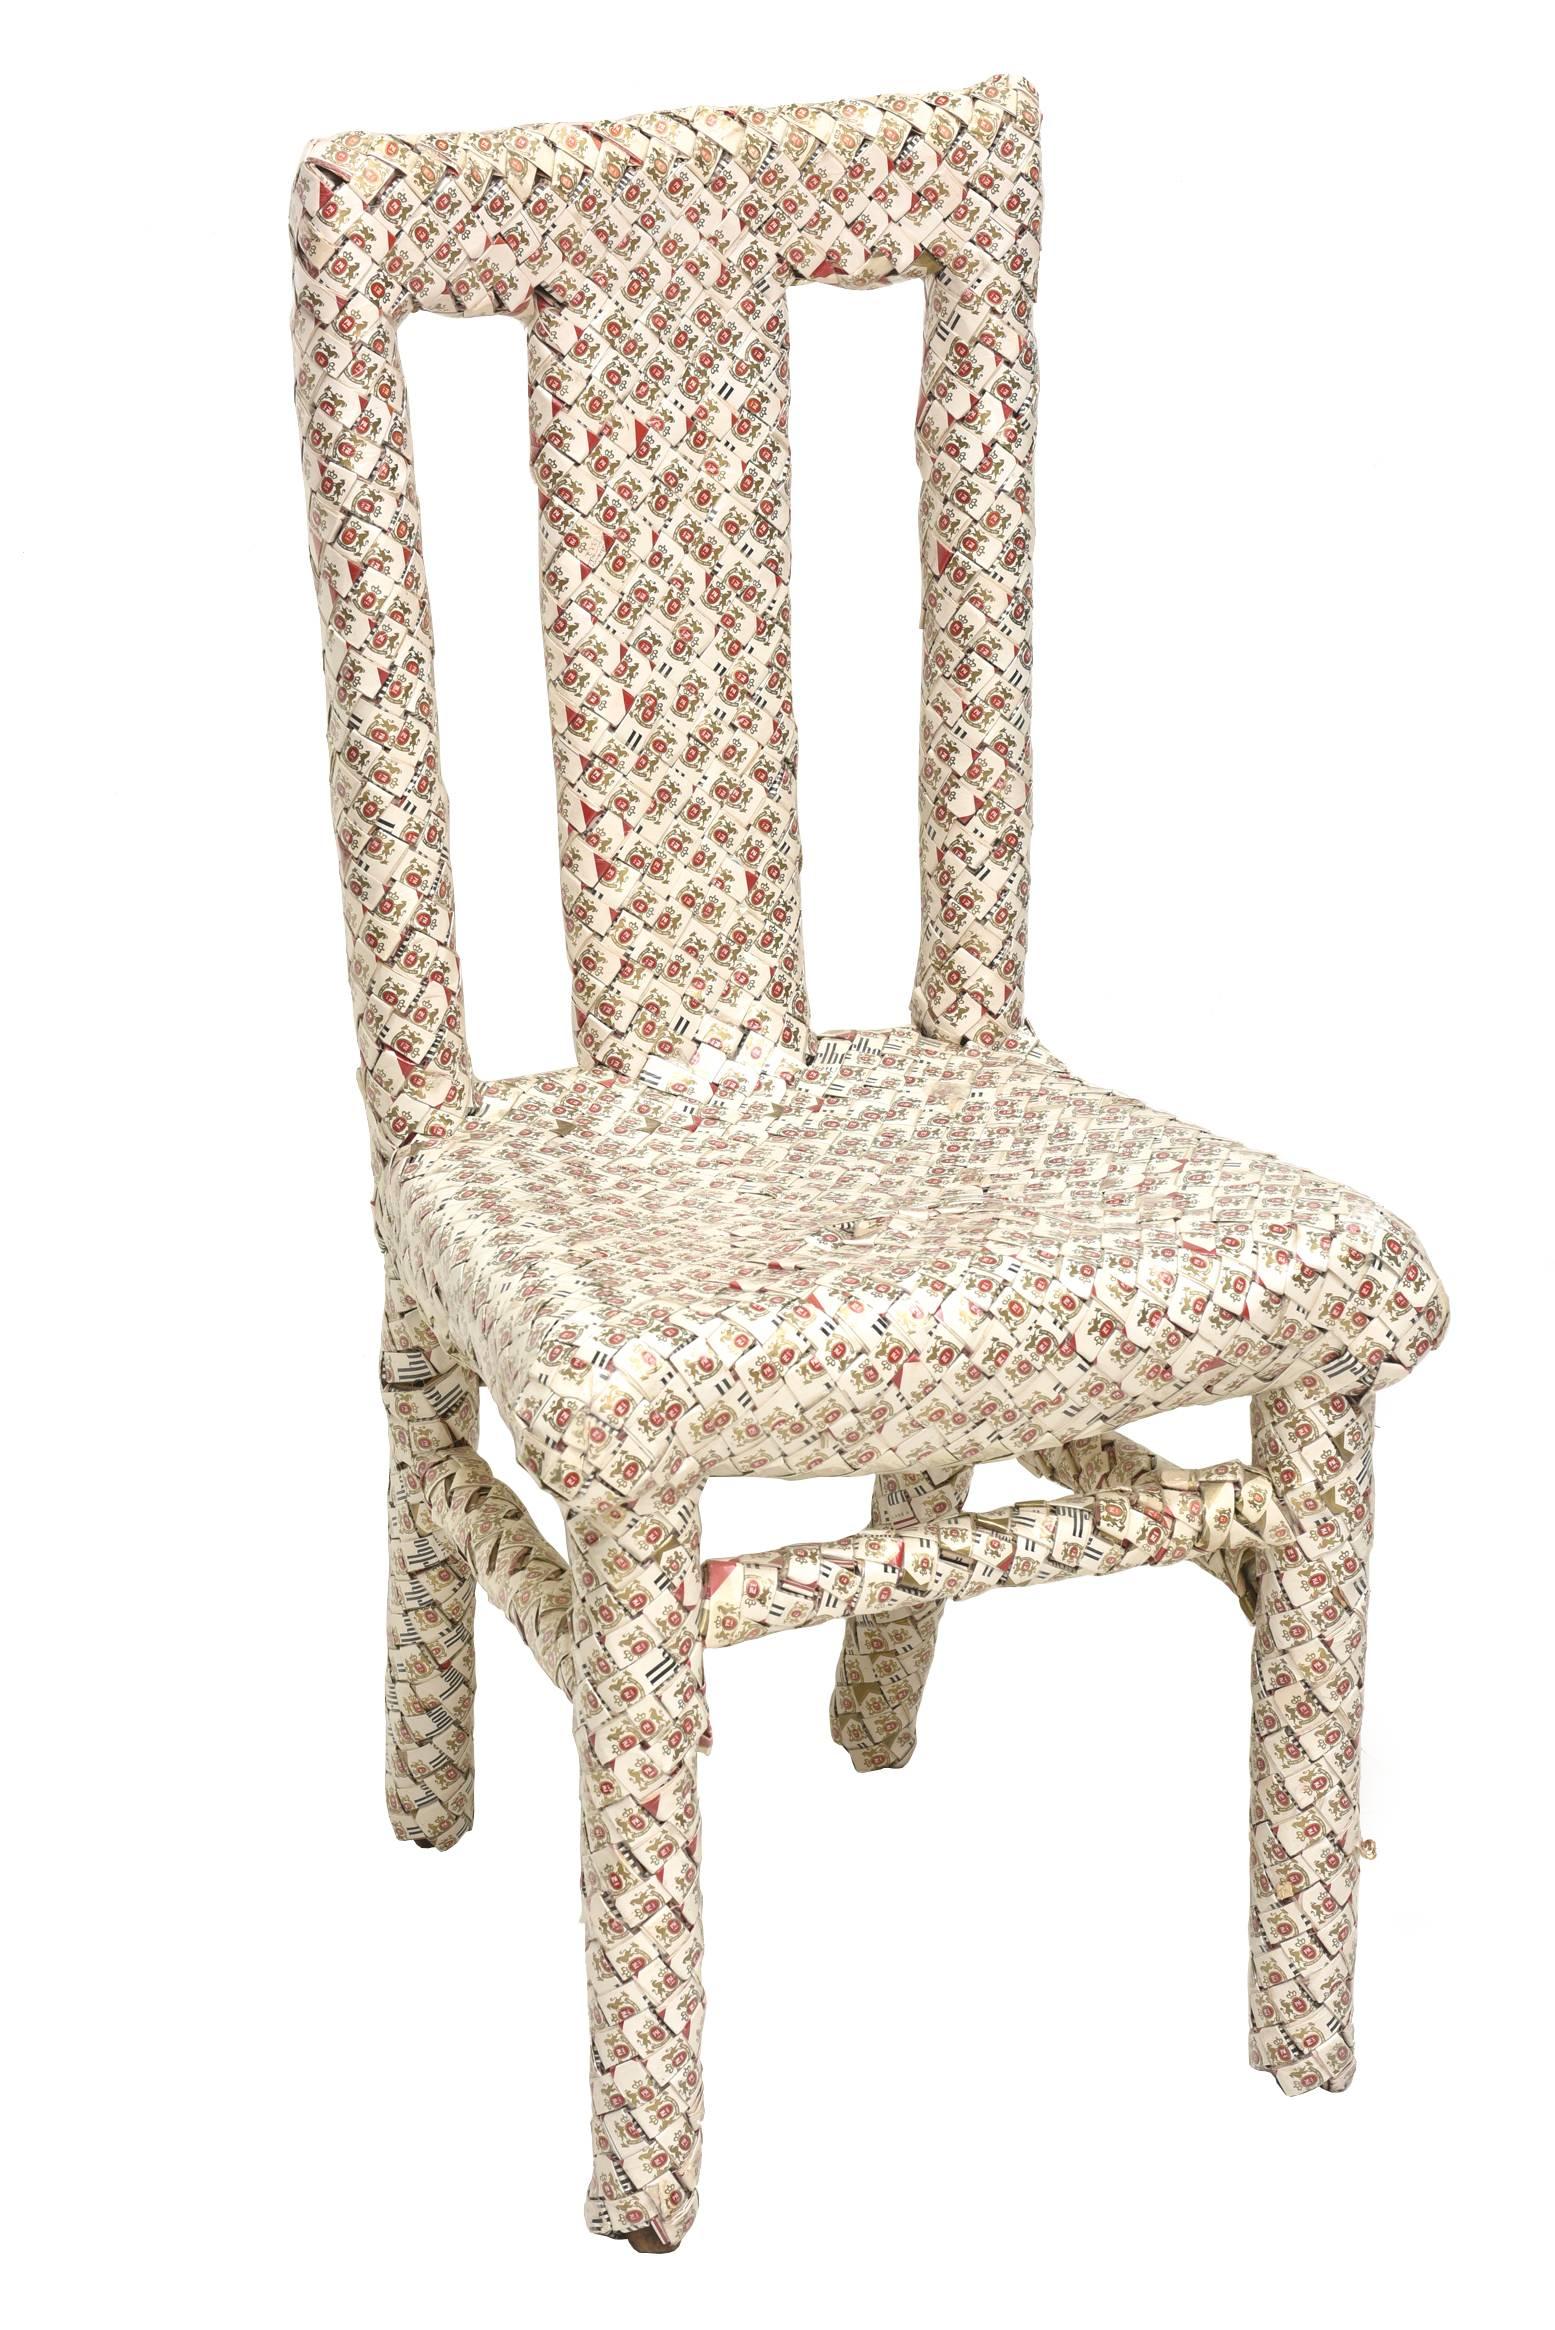 This amazing chair that is a work of art executed with over 1,000 boxes of Marlboro cigarette boxes is from the genre of prison art meets Folk Art. The boxes were folded and weaved and took years of time to make. This is all done over wood. It is by